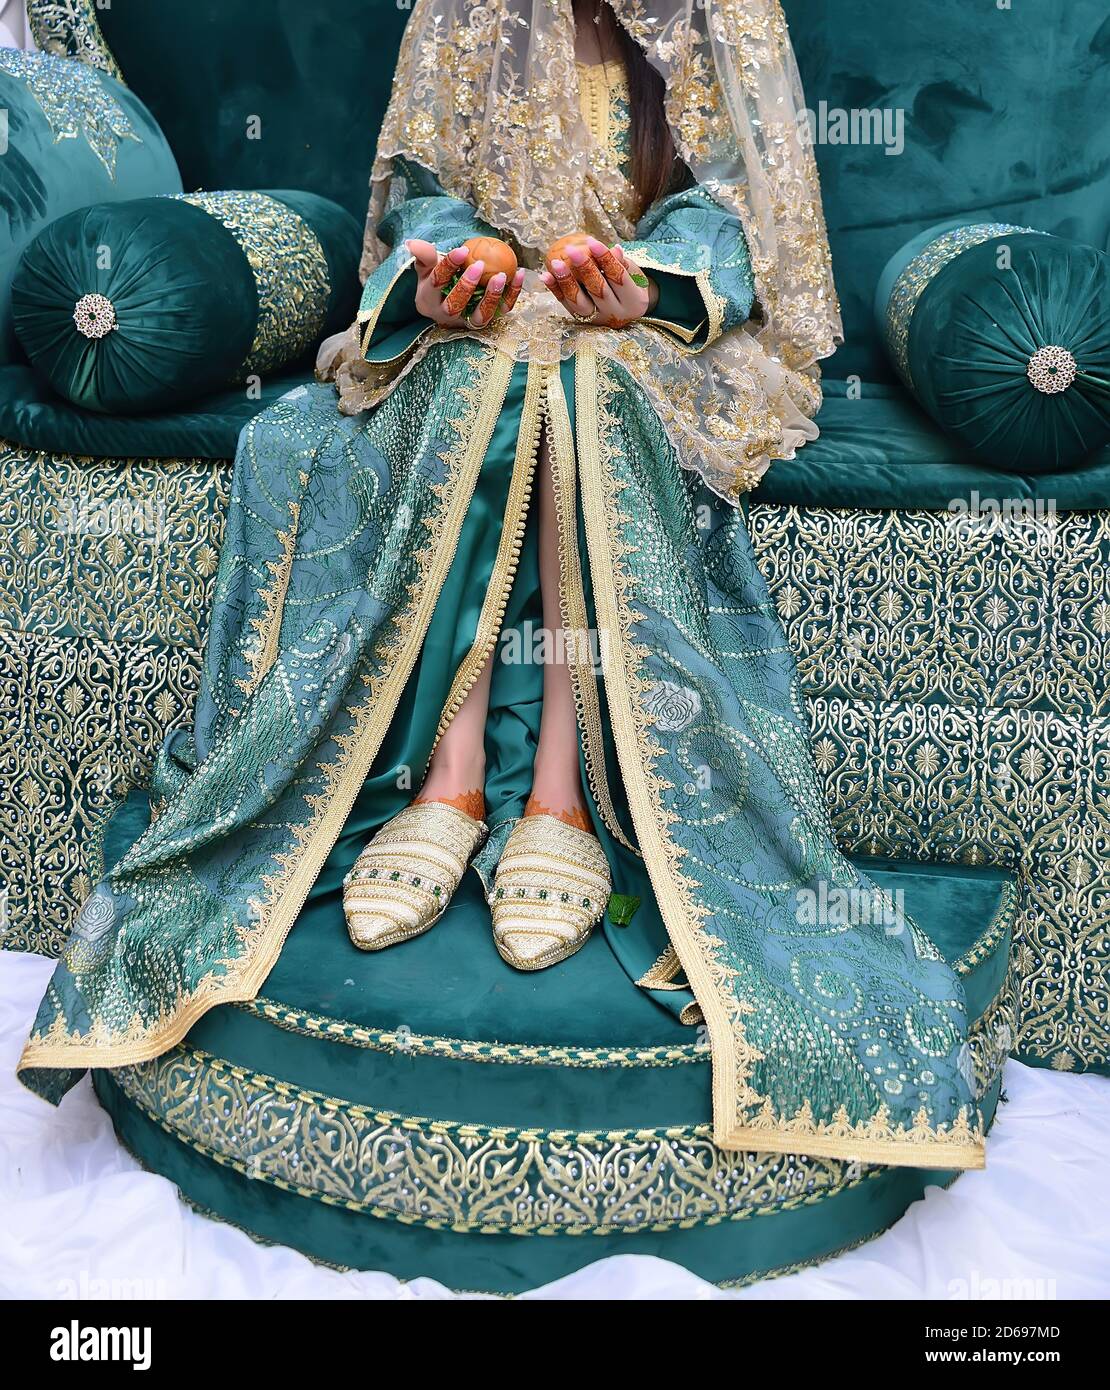 The traditional dress of the Moroccan bride. Beautiful bride wearing Moroccan caftan and precious jewelry Stock Photo